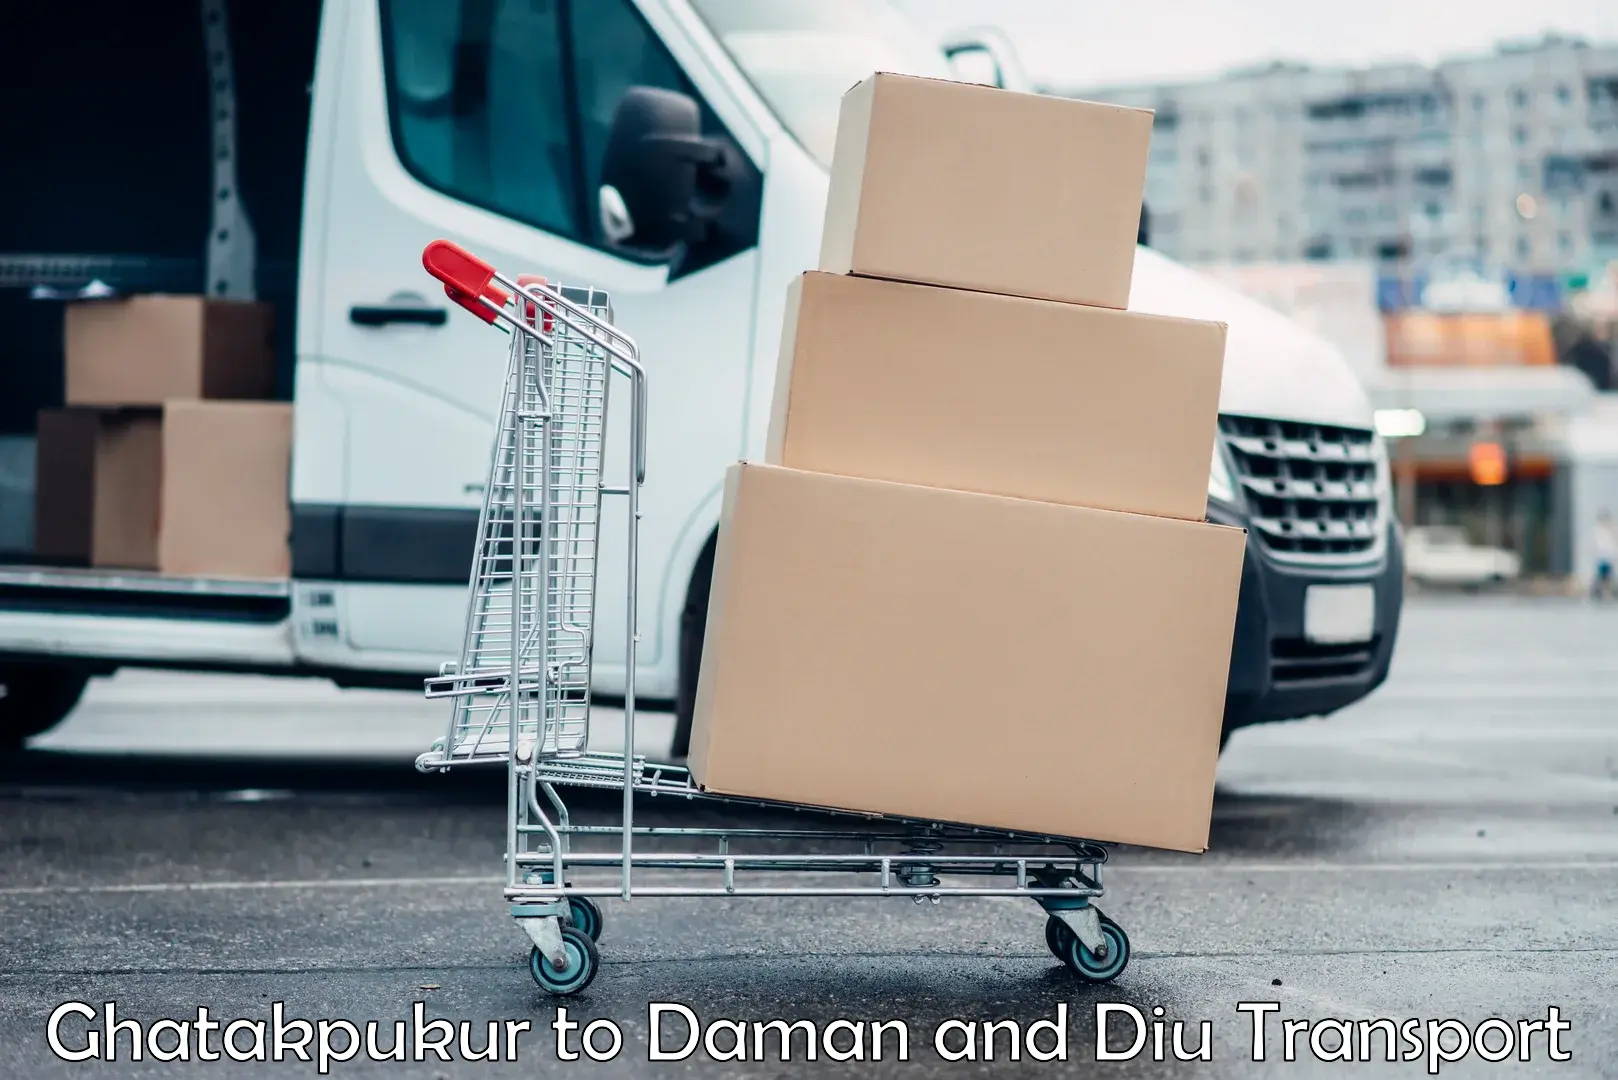 Goods delivery service Ghatakpukur to Daman